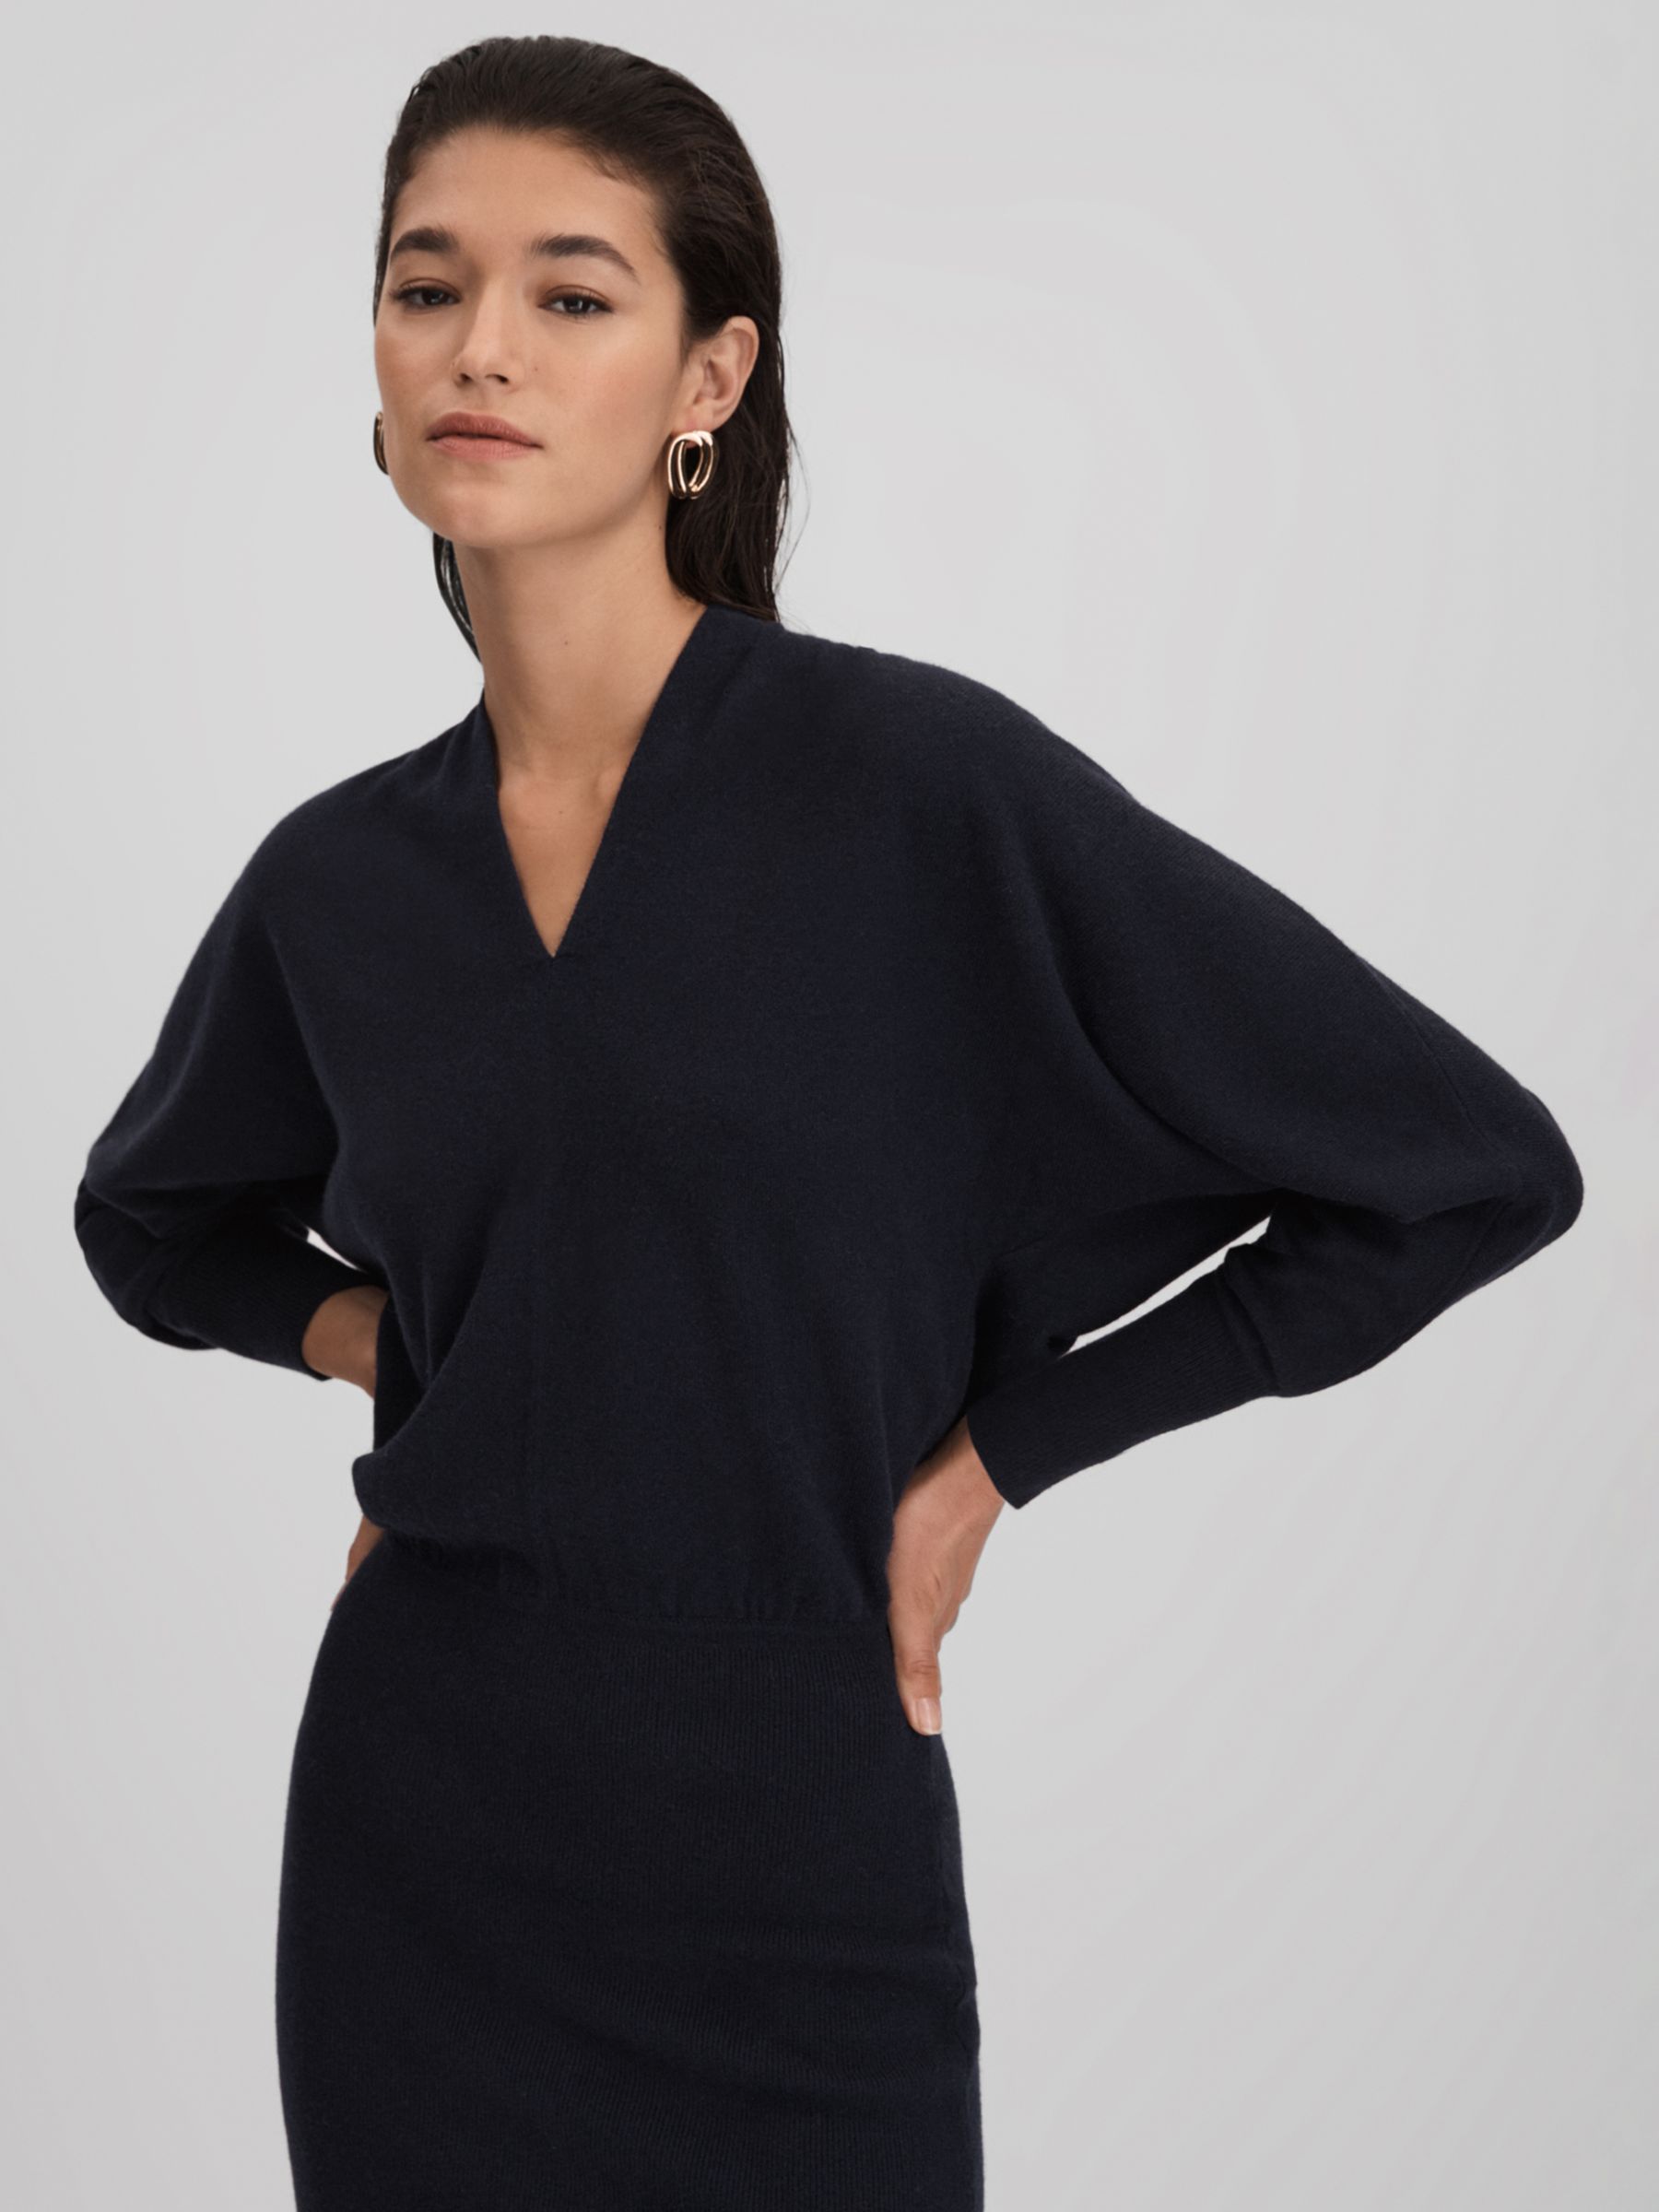 Reiss Sally Wool and Cashmere Jumper Dress at John Lewis & Partners